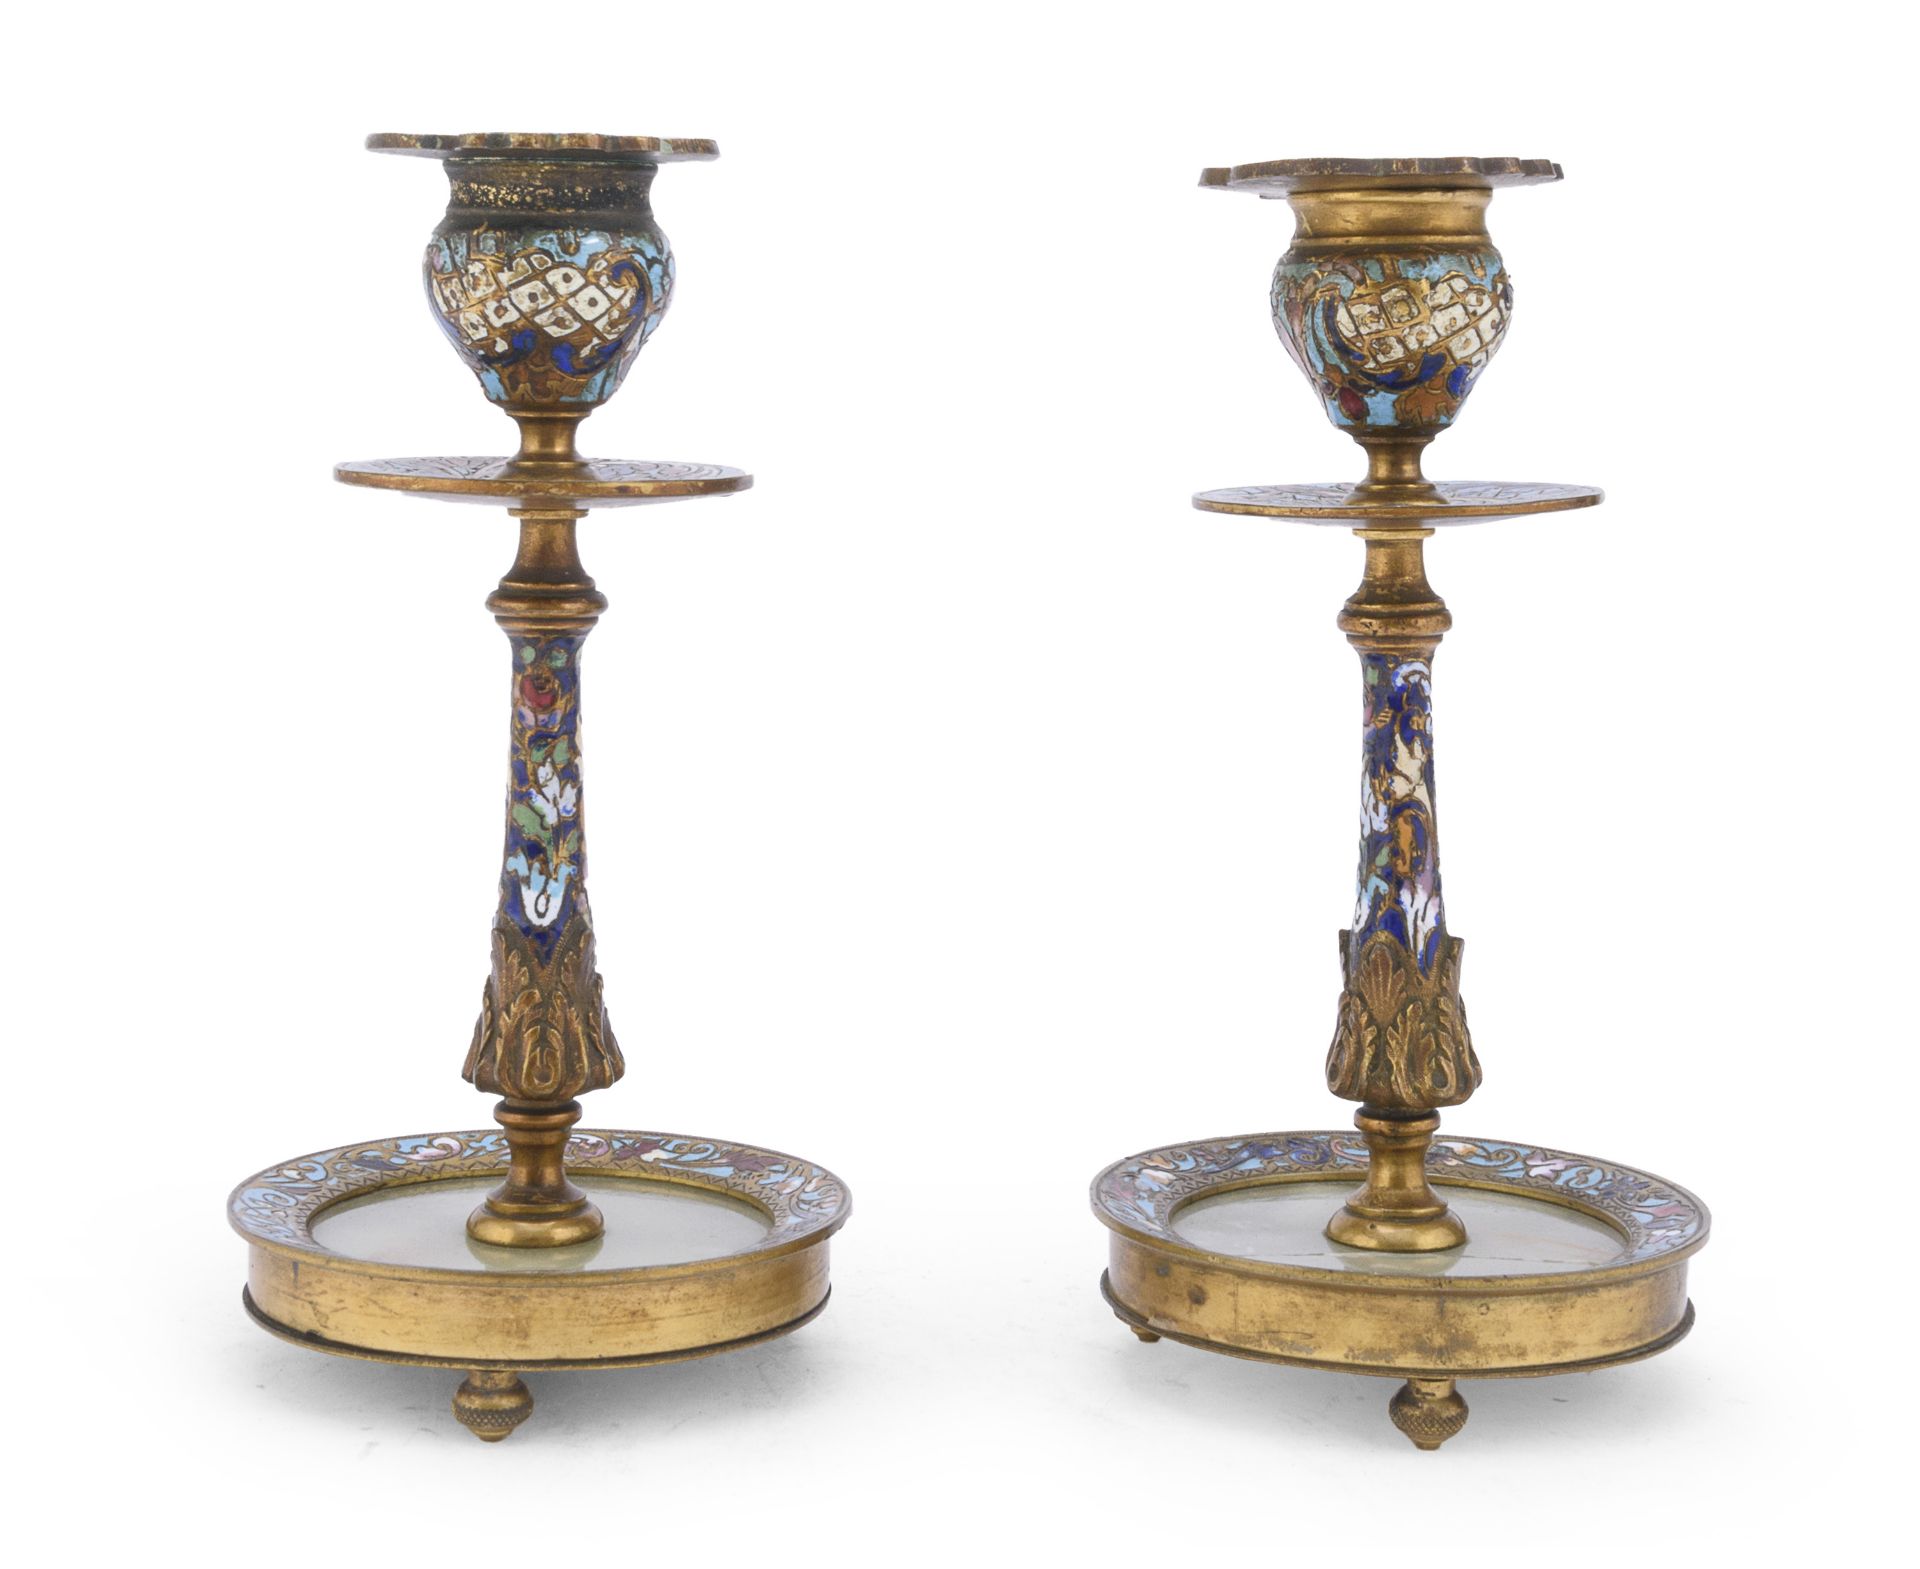 PAIR OF SMALL CANDLESTICKS WITH ENAMELS RUSSIA